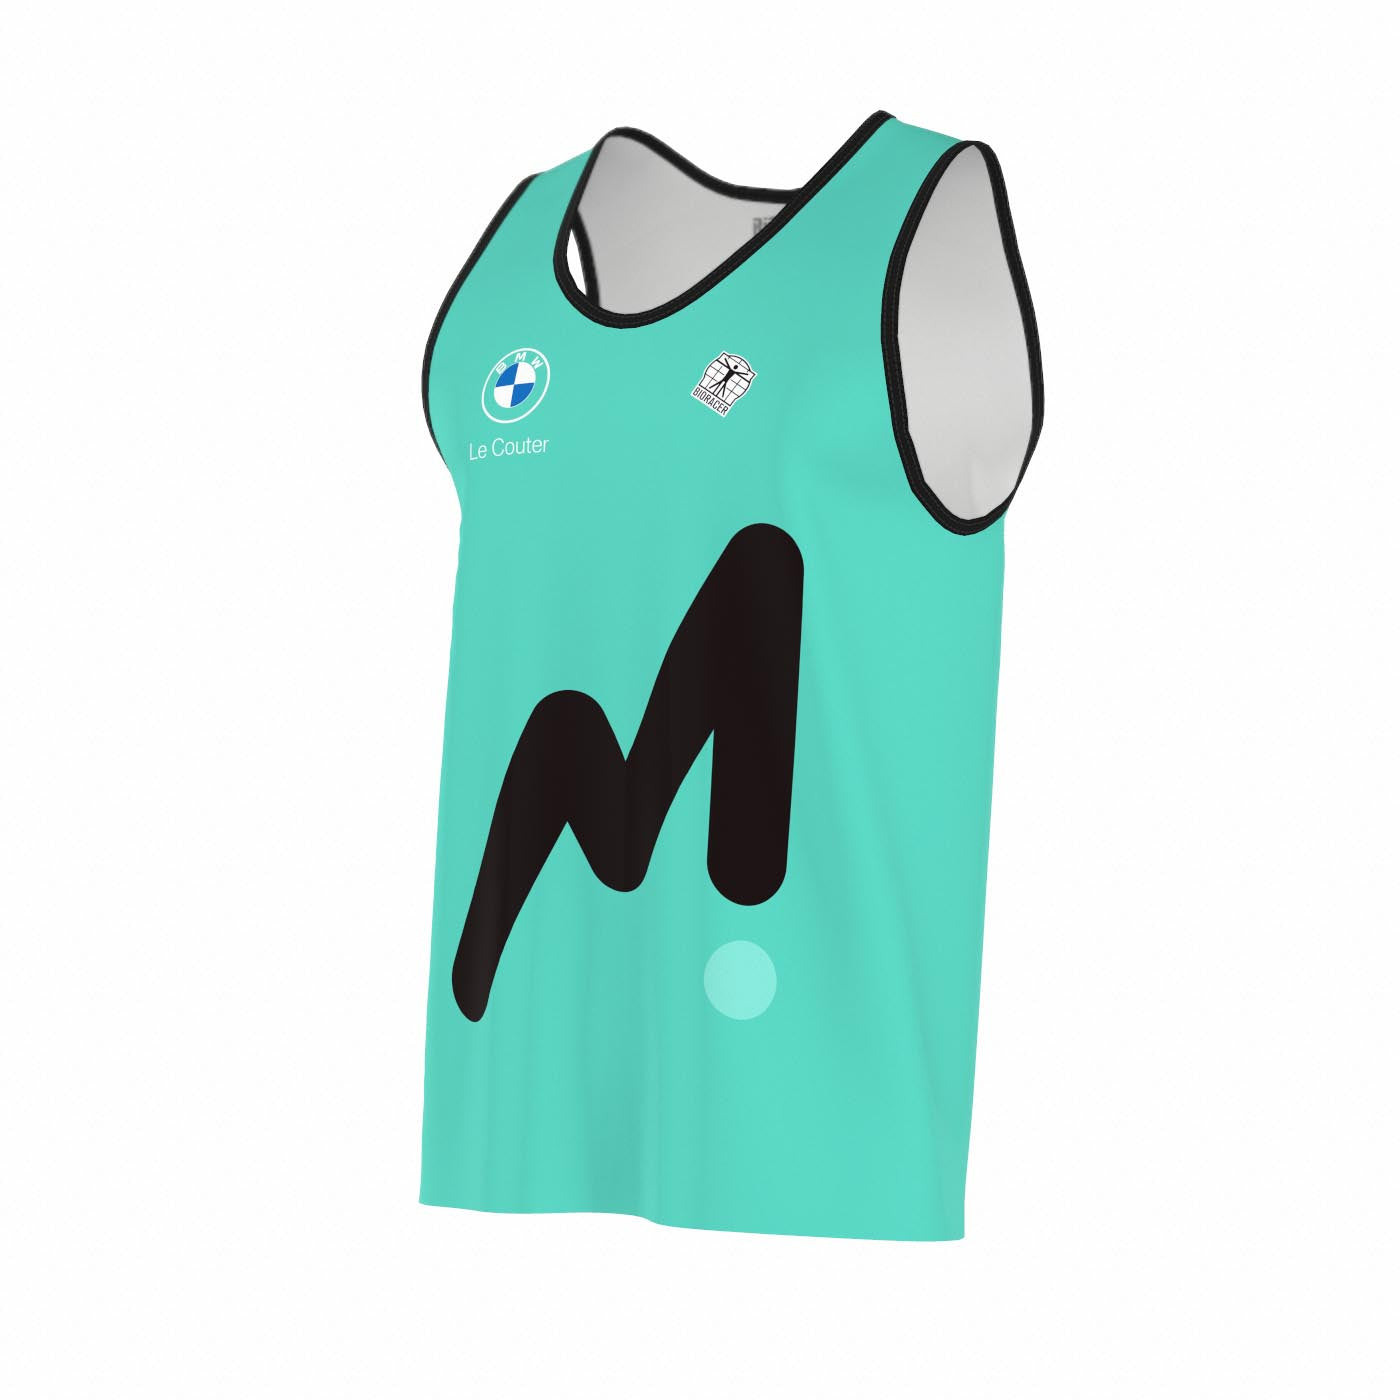 Loopsinglet Ironmanagers dames